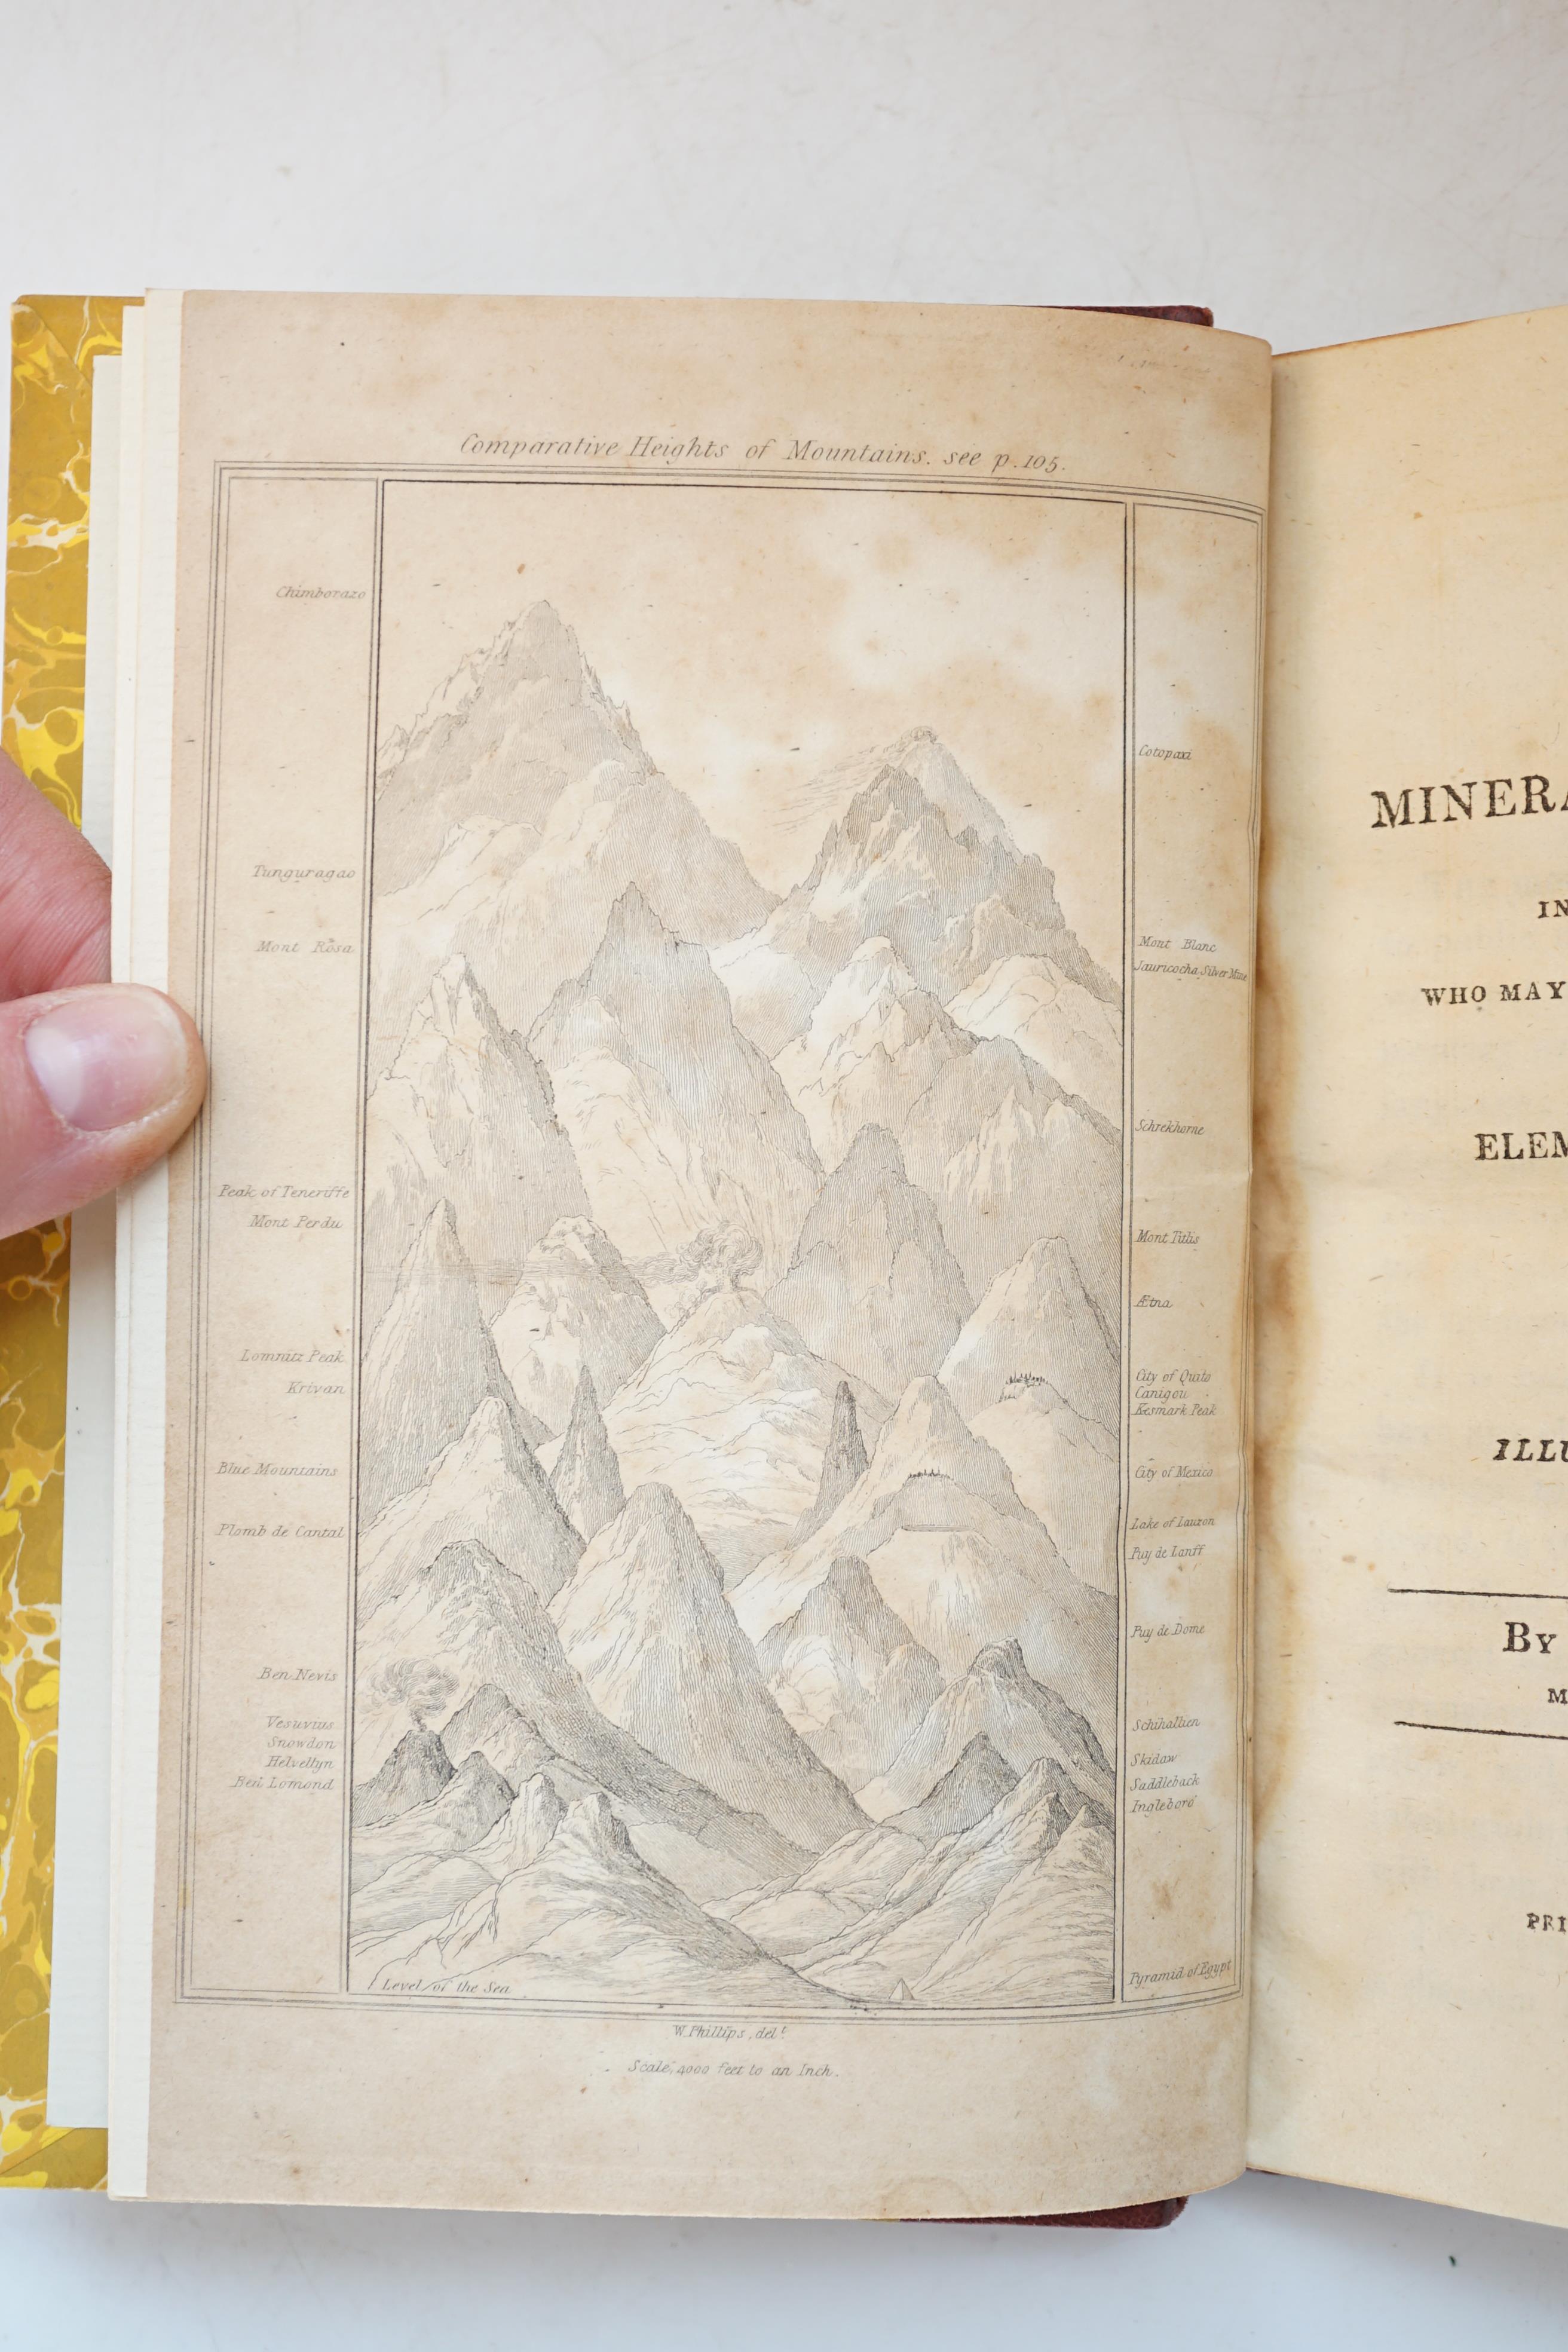 Phillips, William - An Outline of Mineralogy and Geology, 1st edition, authors presentation copy, 4 plates, including 2 hand-coloured, 8vo, rebound quarter morocco, spine gilt in compartments, rubbed, 8vo, London, 1815.